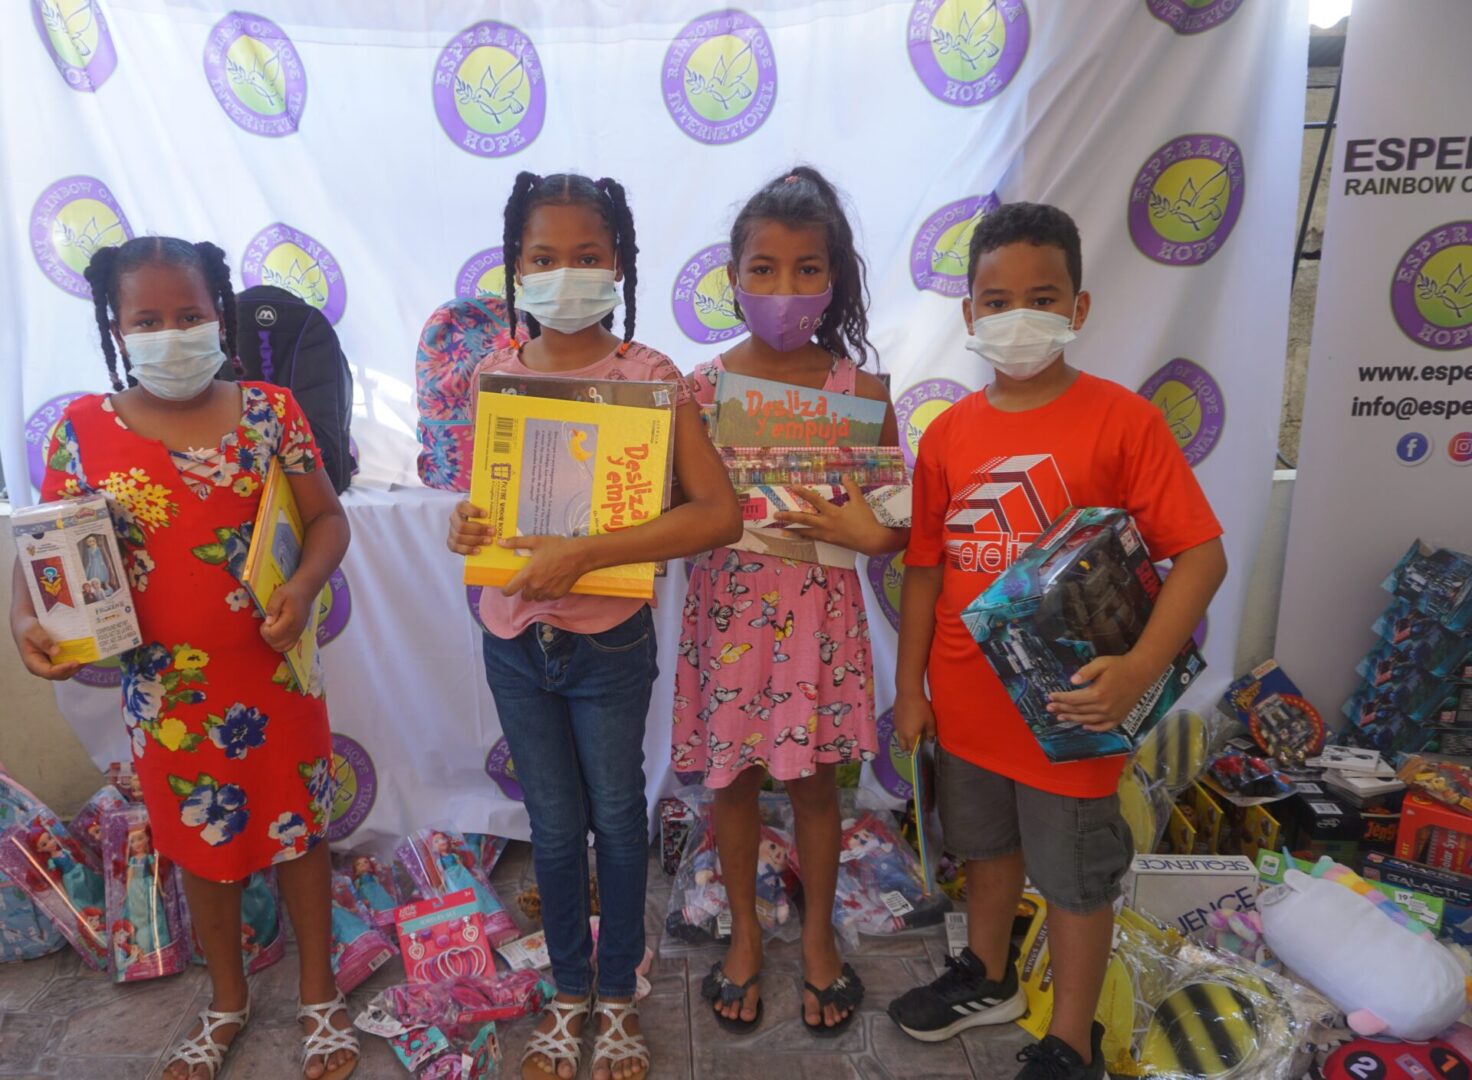 Four children standing against the Esperanza-Hope backdrop with their toys and books, batch 14